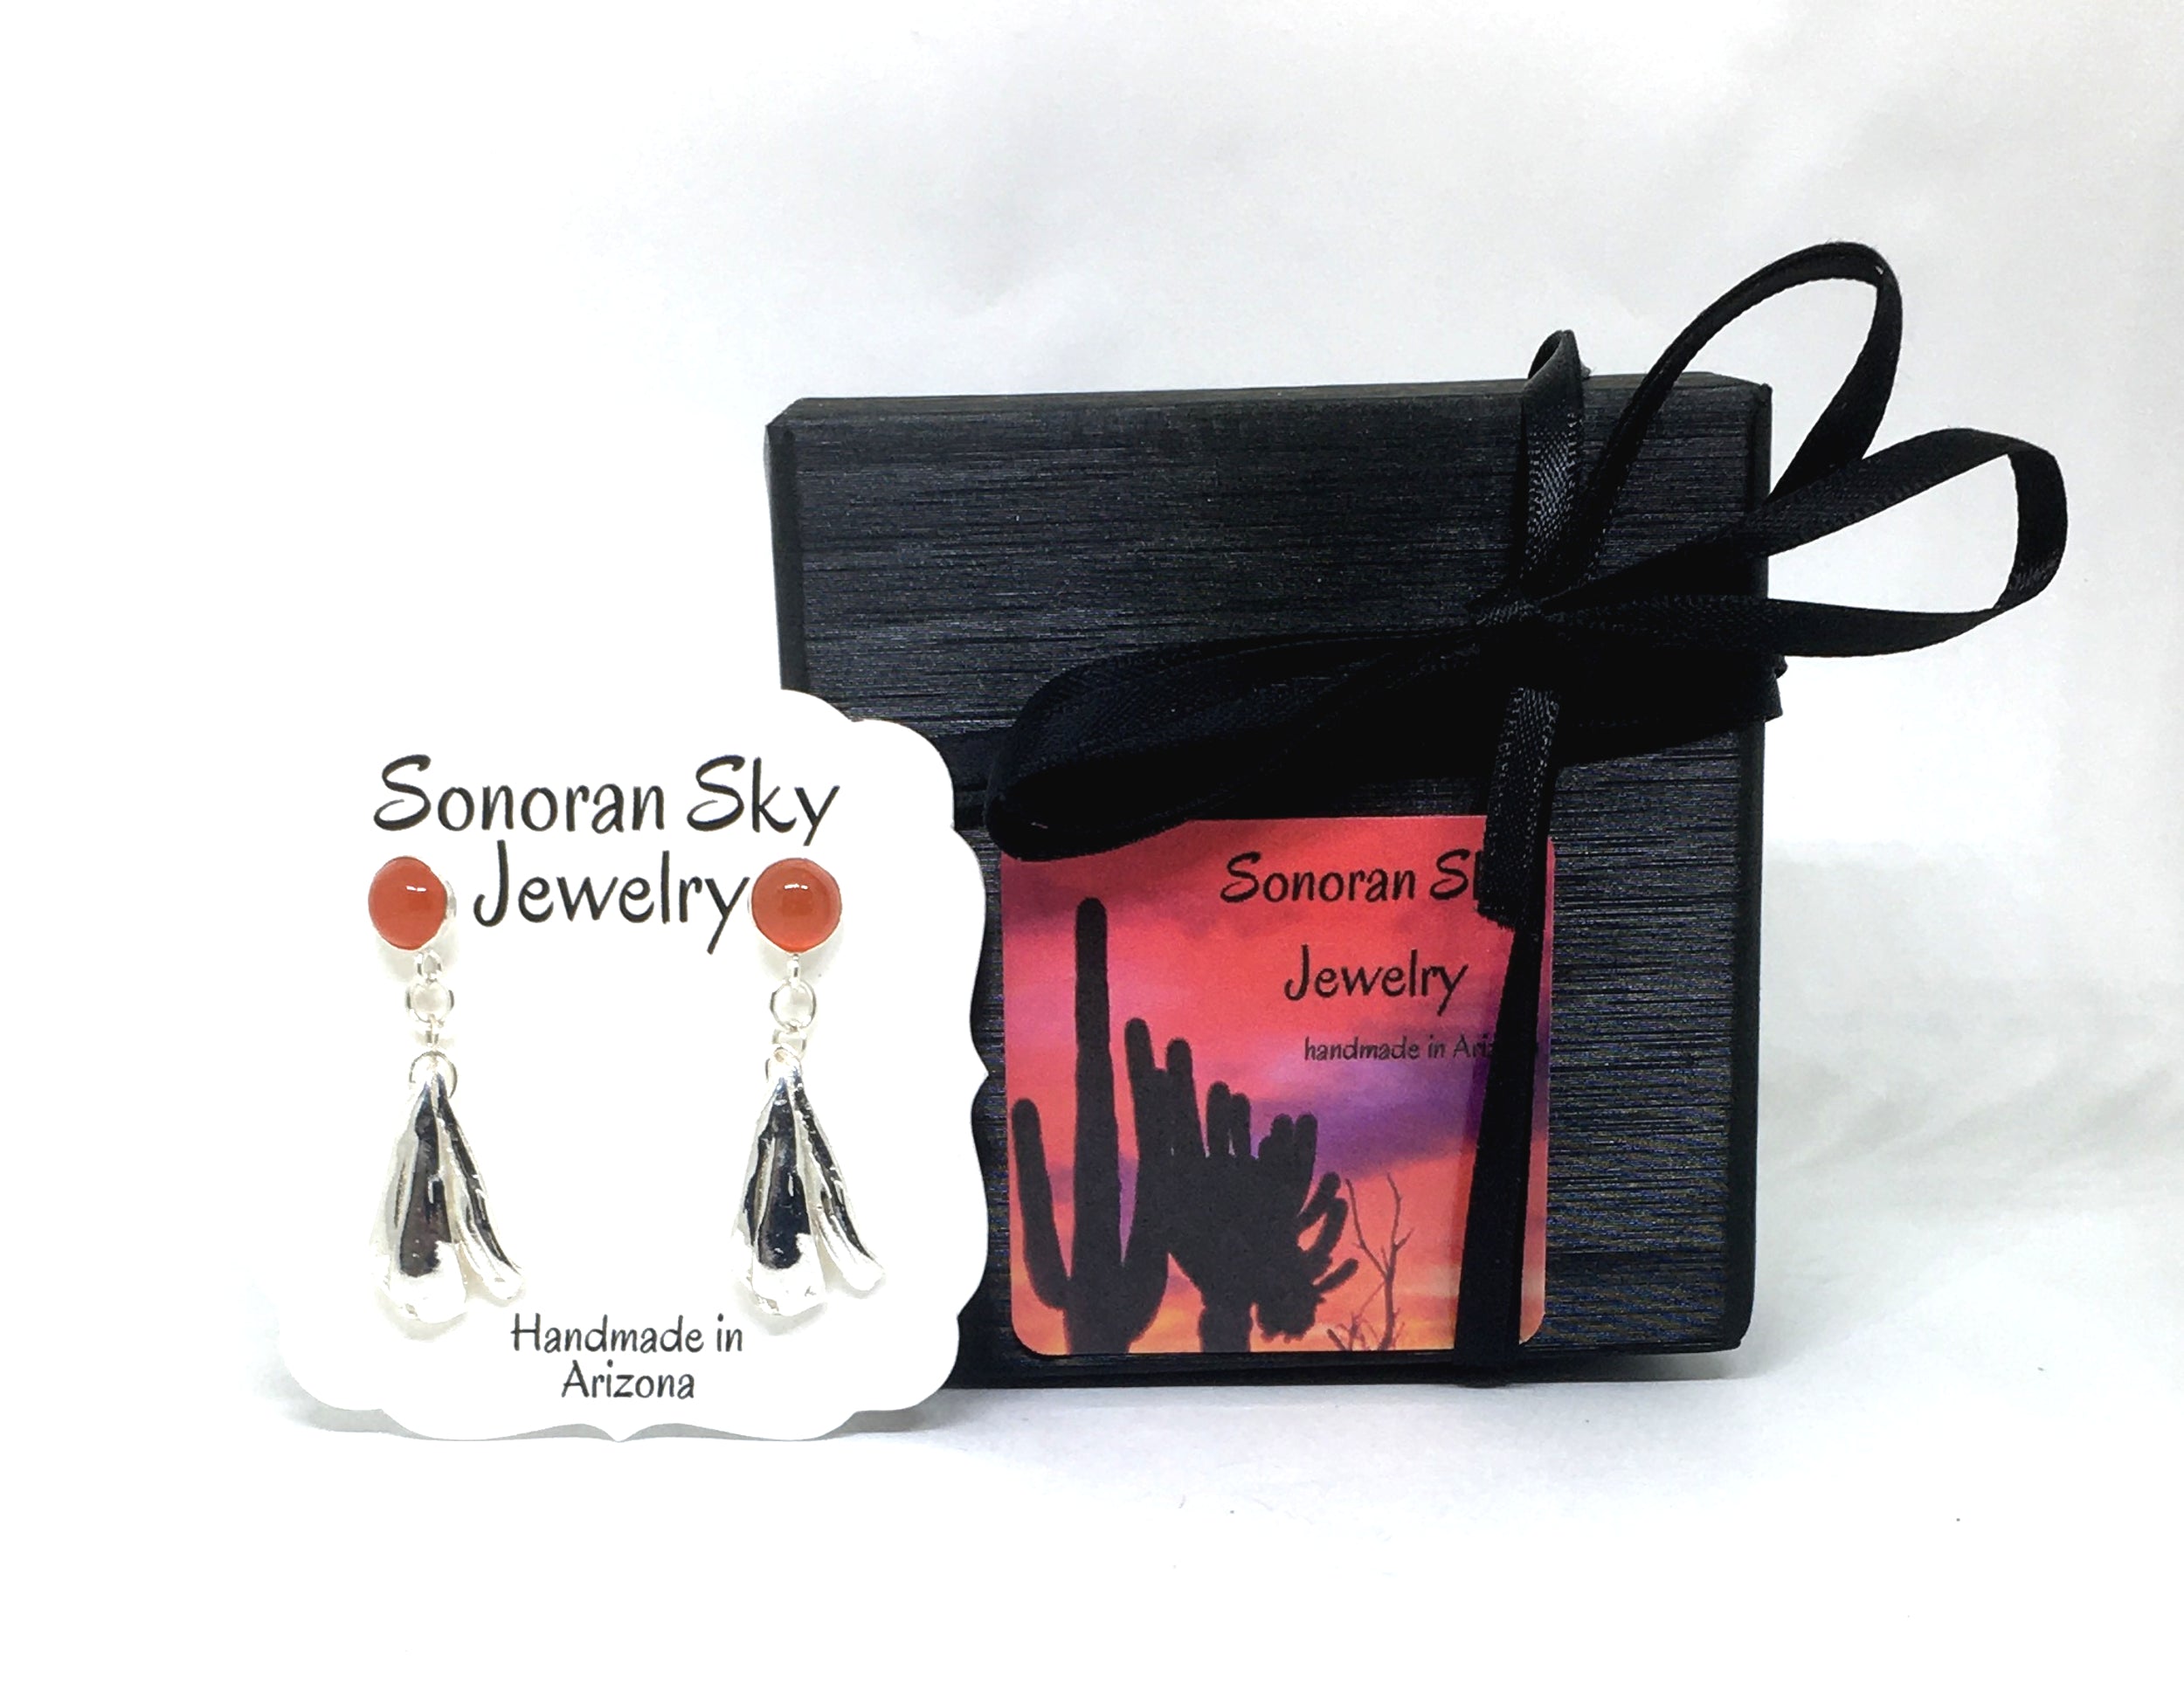 🌵🌵🌵🌵🌵❤️🌵🌵🌵🌵😜  Sonoran Sky Jewelry is made by me, for you, in my studio in Arizona.  Thank you so much for stopping by and supporting a local artisan.